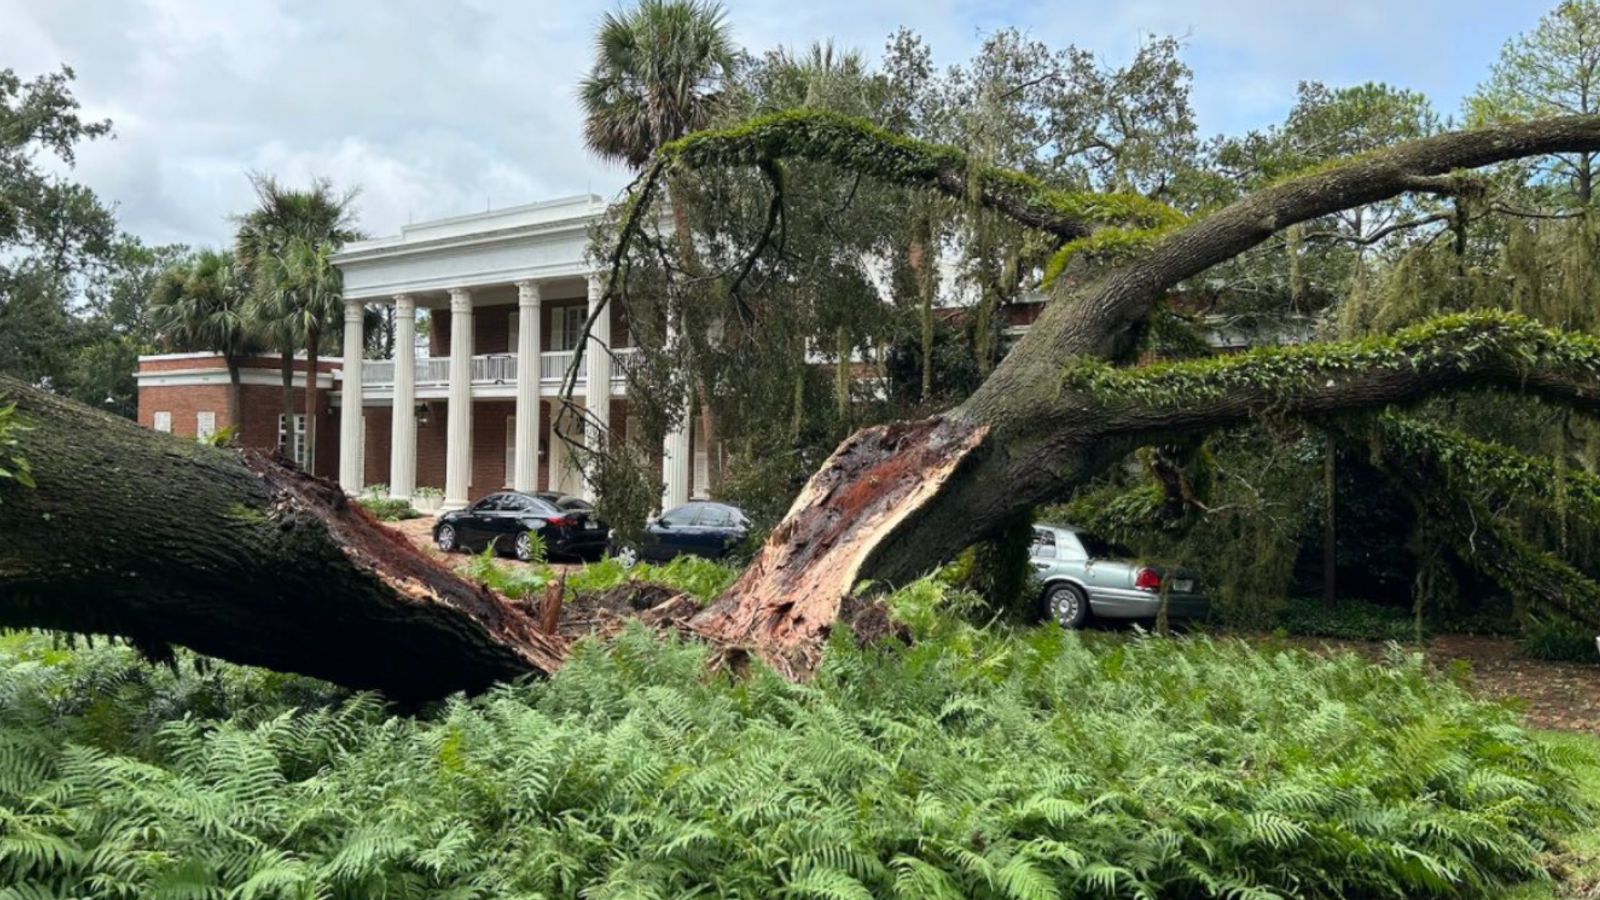 Hurricane Idalia: Tree falls on Ron DeSantis' house moments after he warned people to stay safe